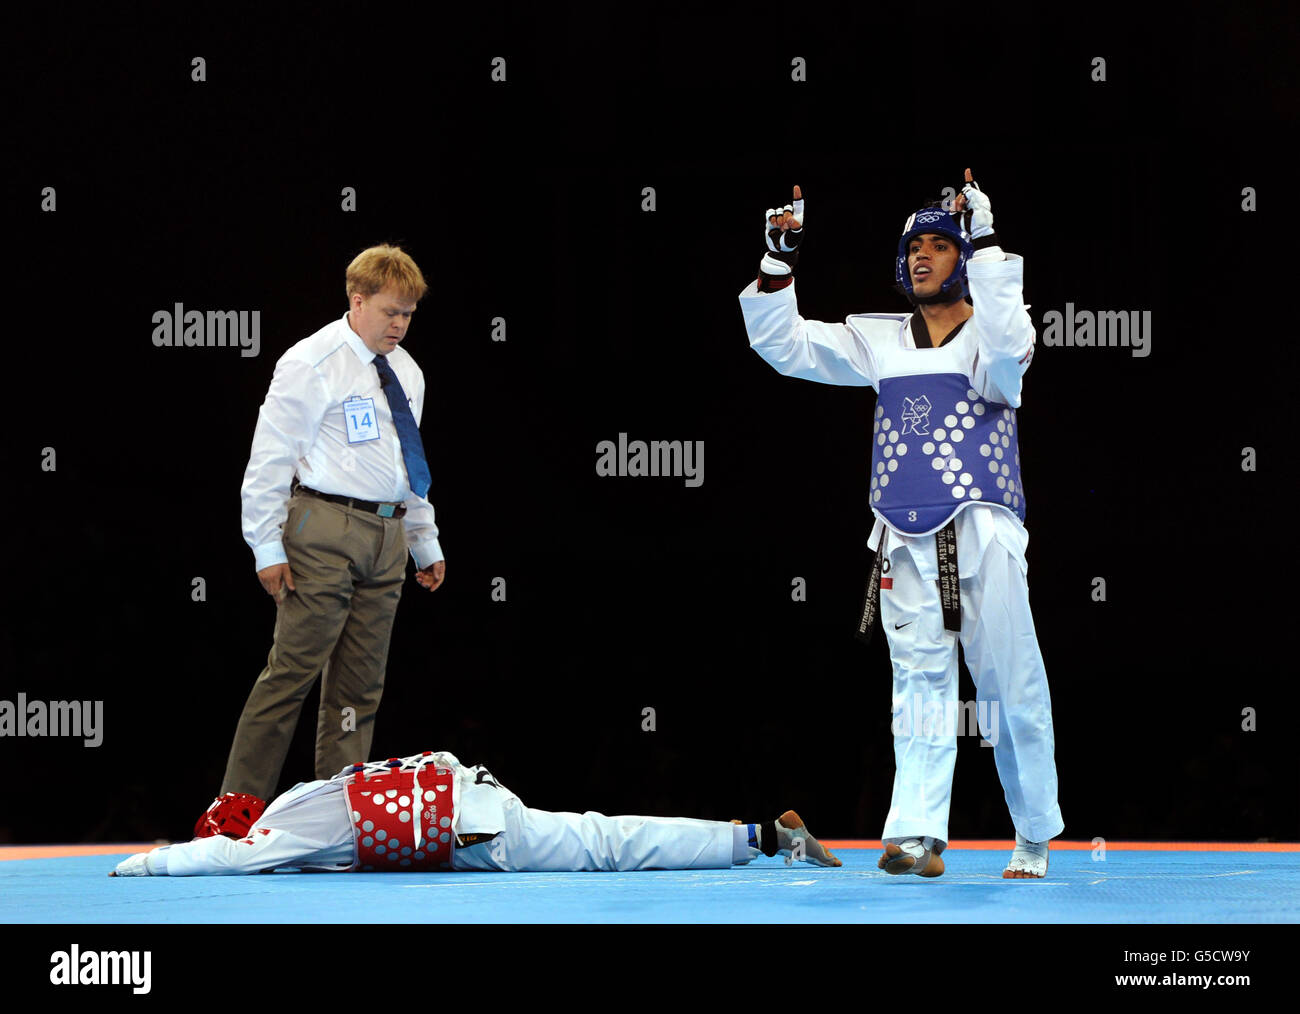 Yemen's Tameem Mohammed Ahmed Al-Kubati (blue) reacts as he competes against Dominican Republic's Yulis Mercedes Reyes during the Men's (-58kg) Taekwondo at the ExCel centre, London Stock Photo